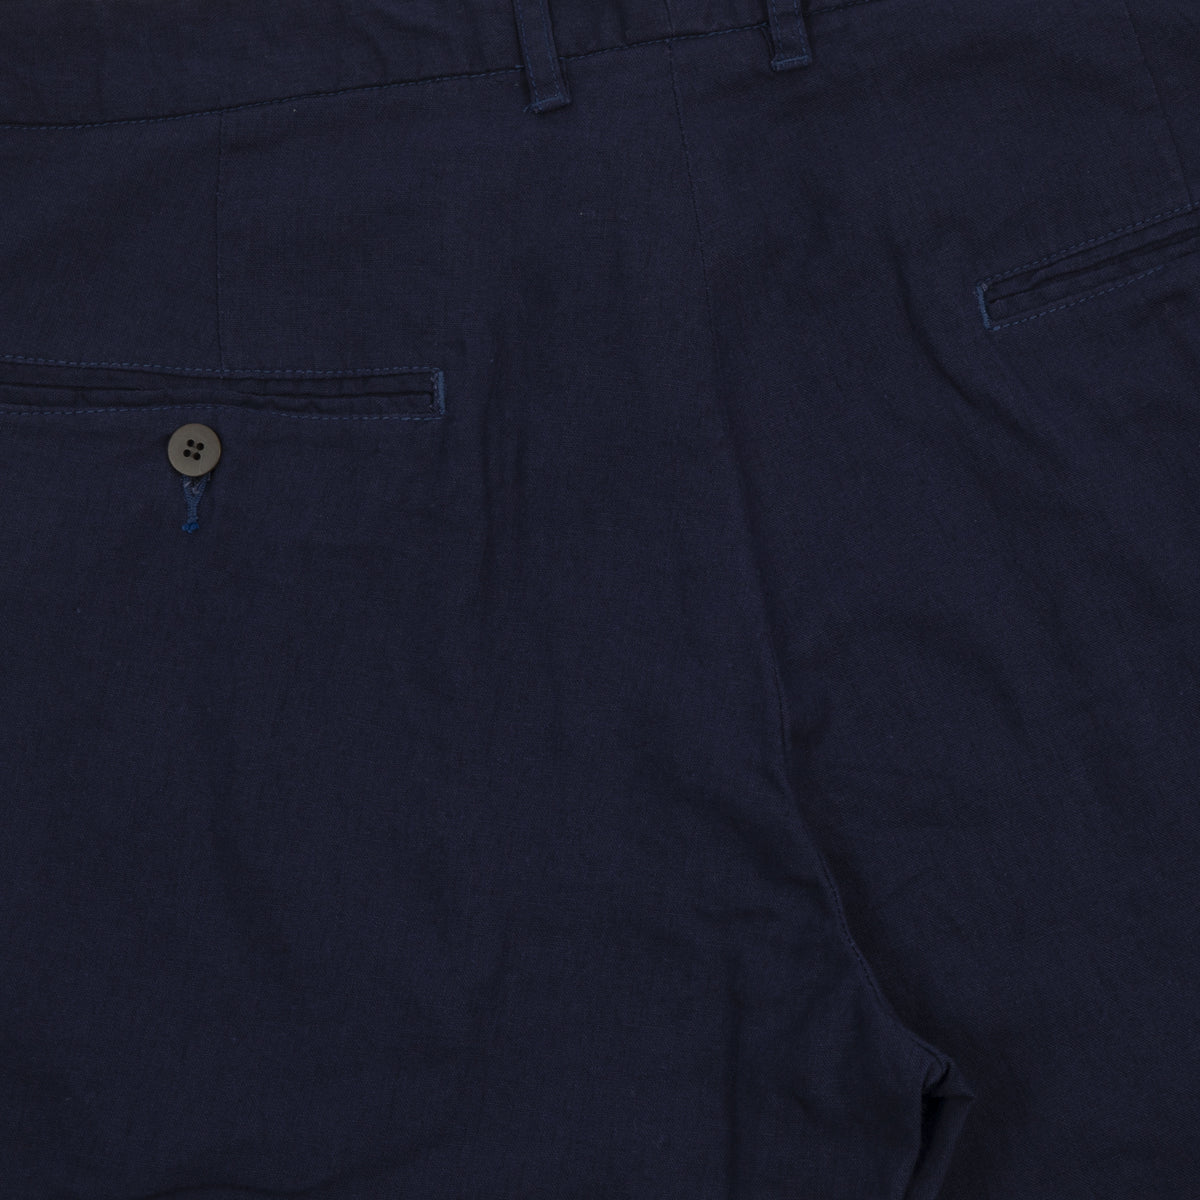 Fujito - Tapered Trousers - Navy